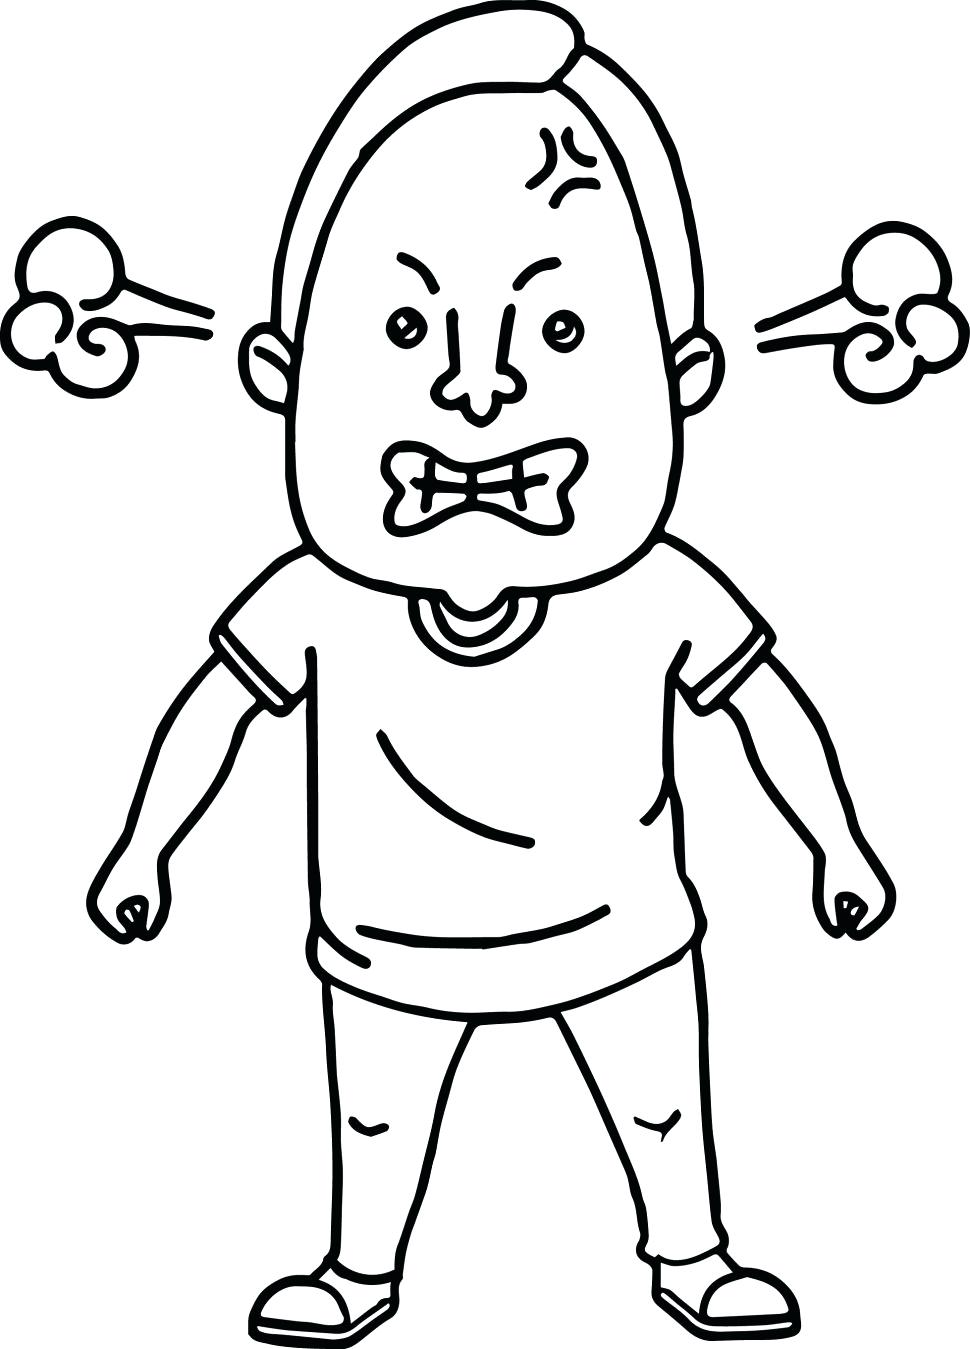 Angry Face Coloring Page At GetColorings Free Printable Colorings